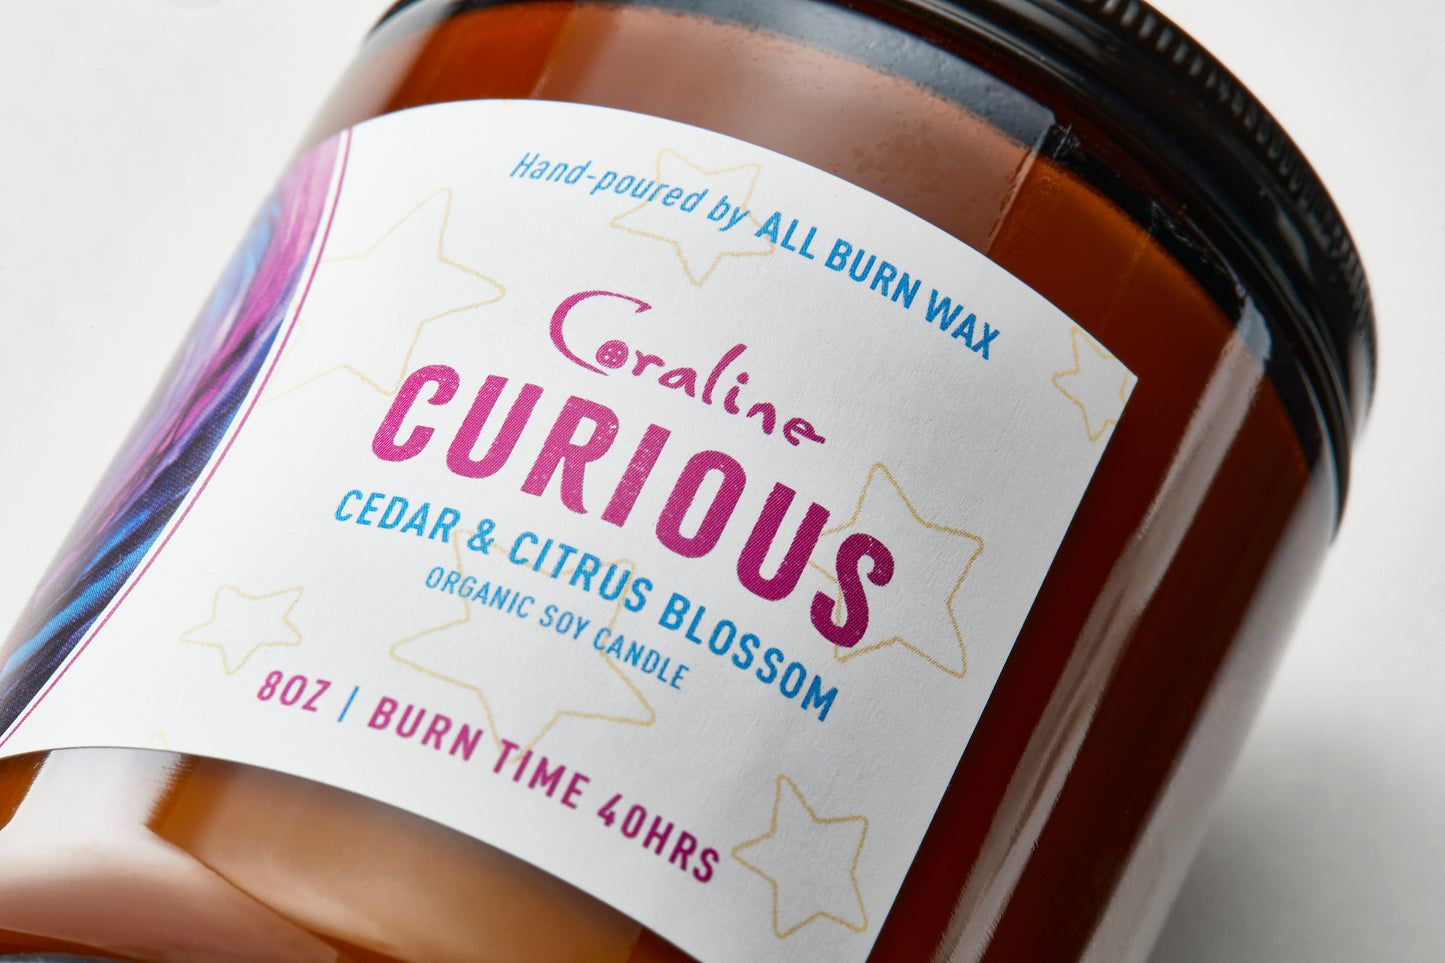 Coraline 'Curious' Organic Soy Candle